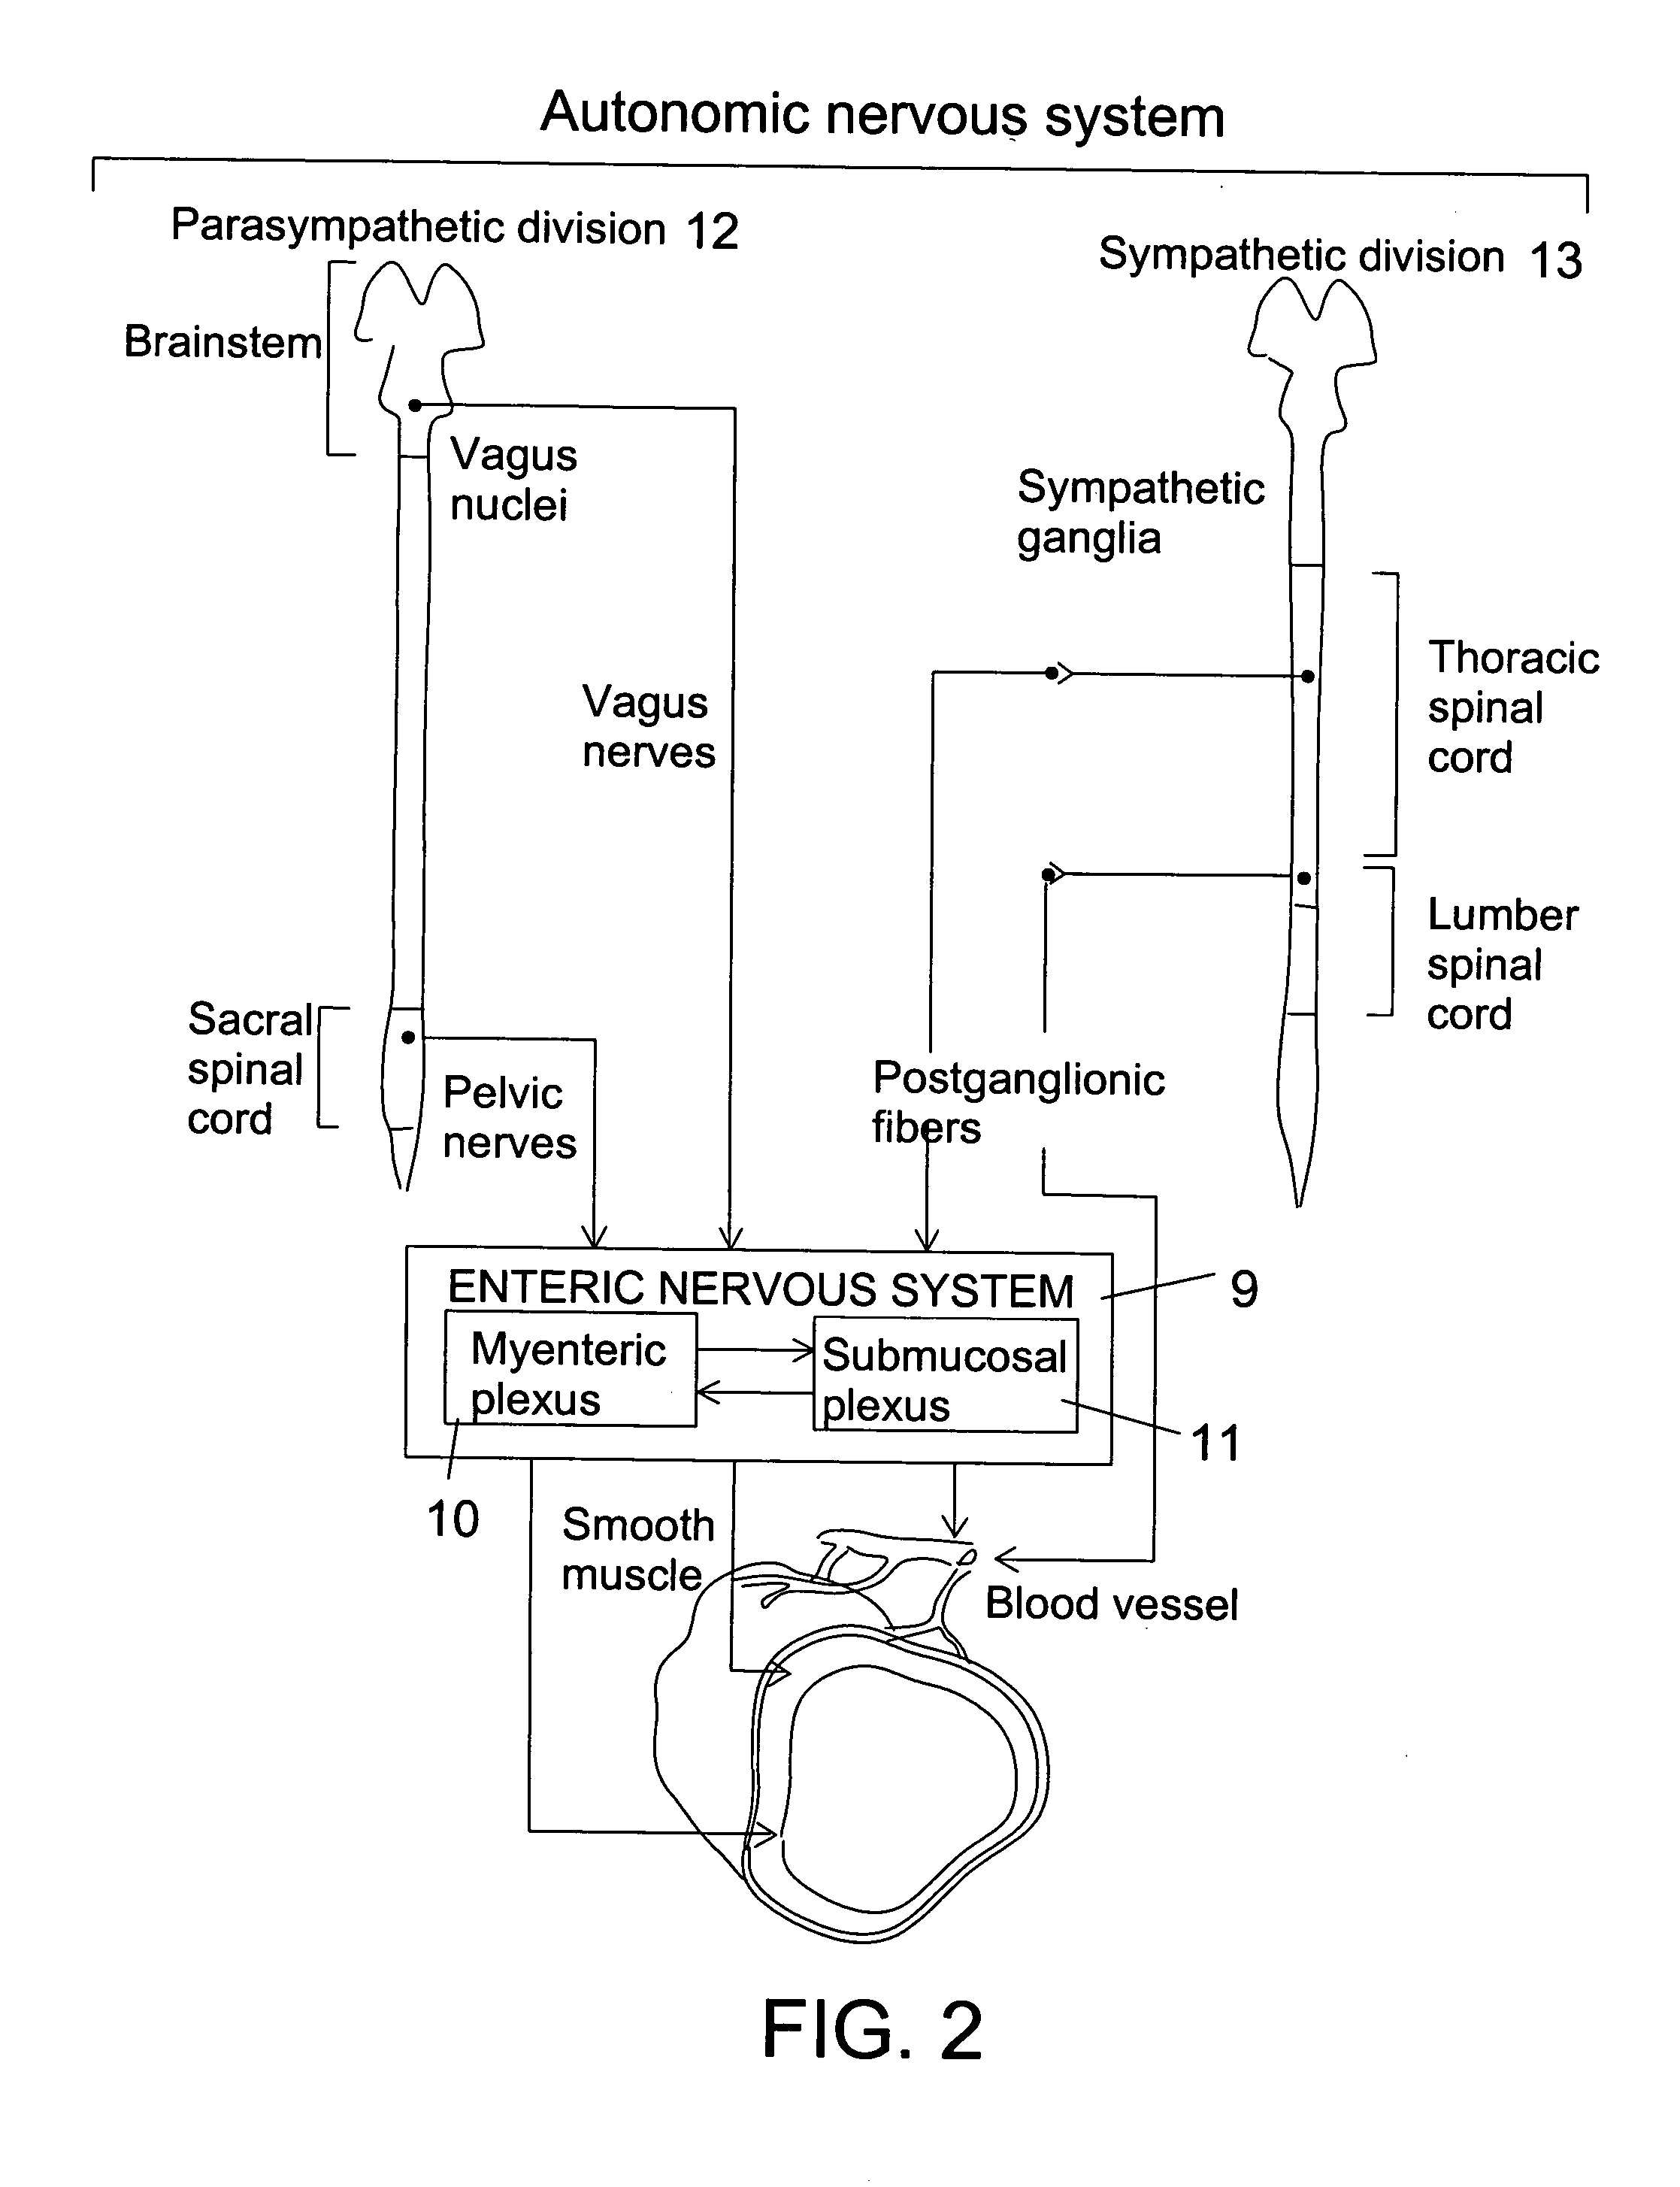 Method and system for gastric ablation and gastric pacing to provide therapy for obesity, motility disorders, or to induce weight loss